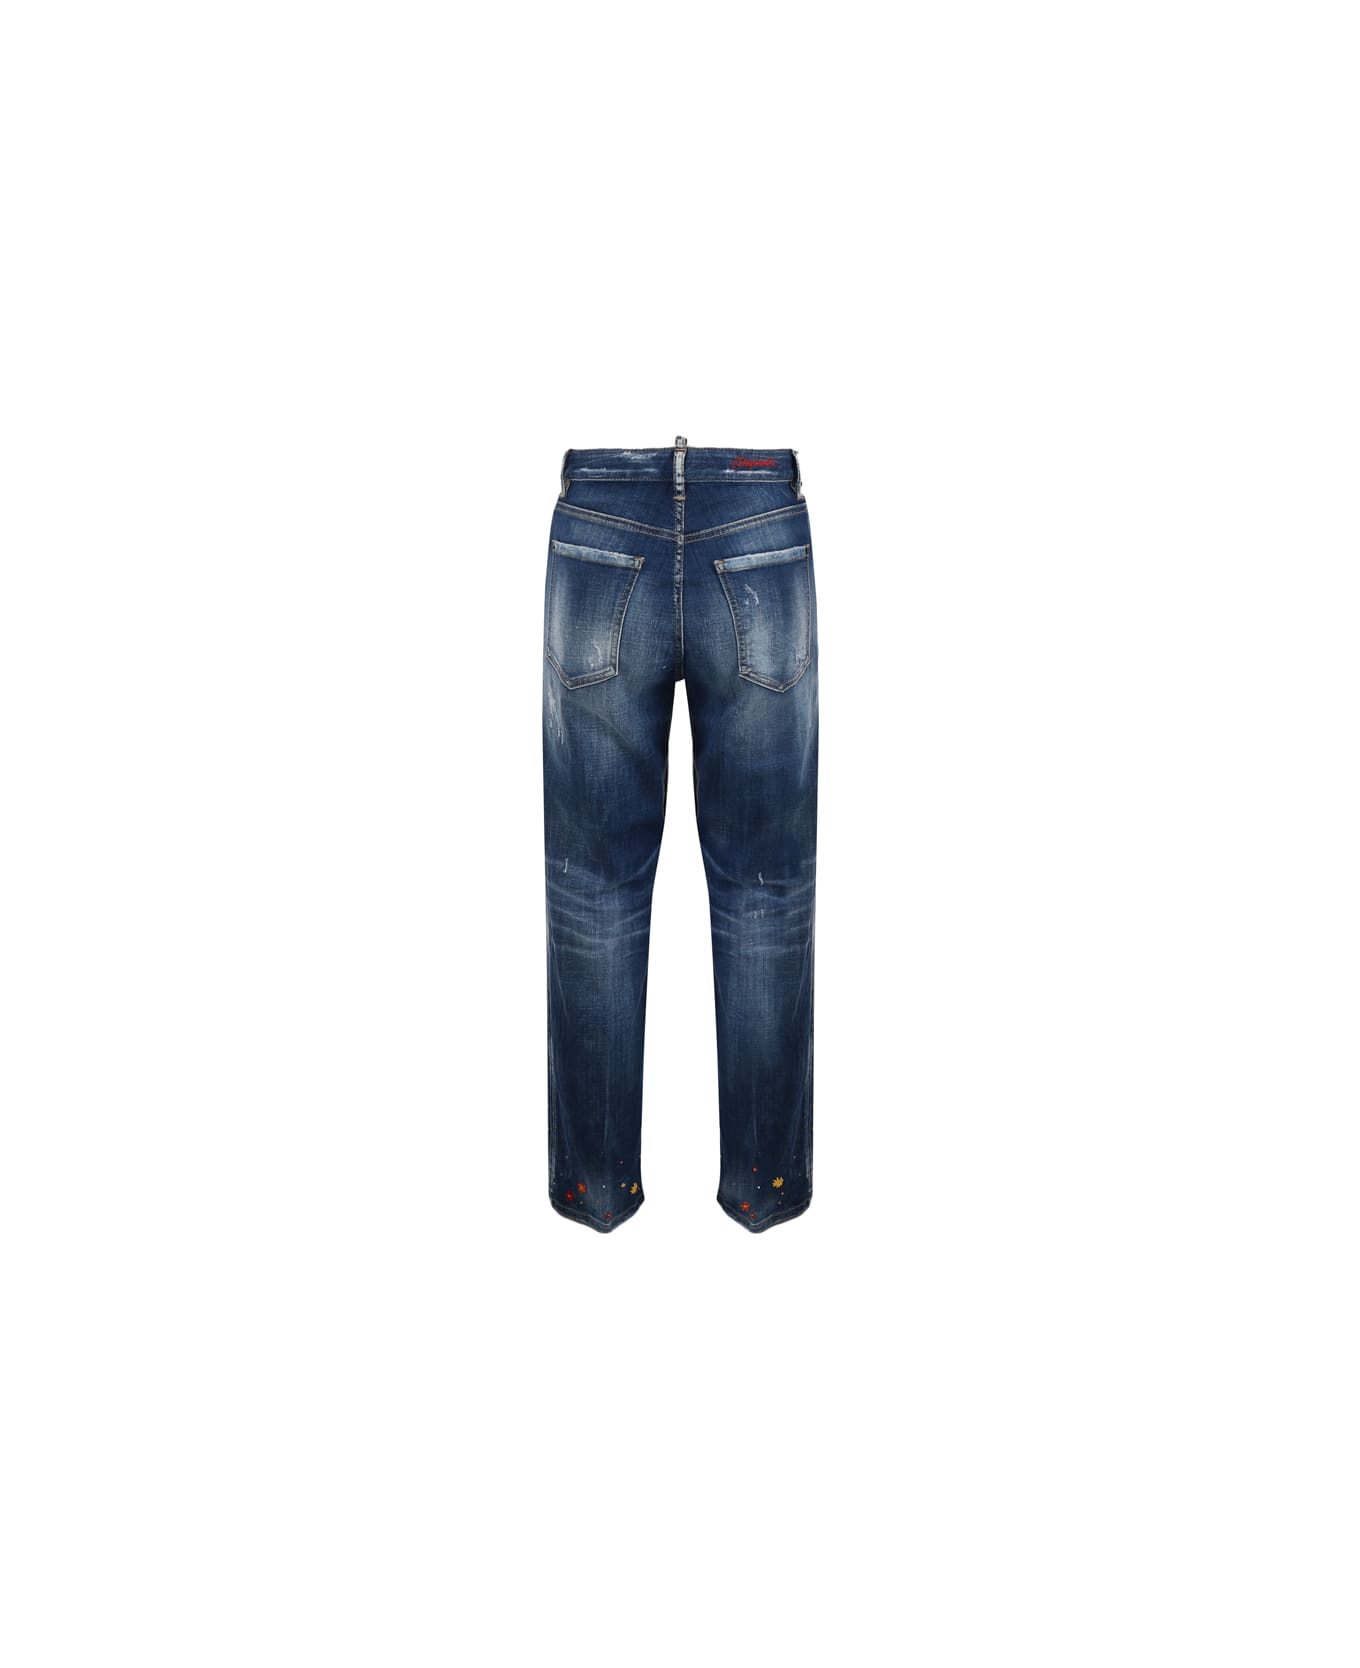 Dsquared2 Cool Guy Jeans - Blue navy ボトムス